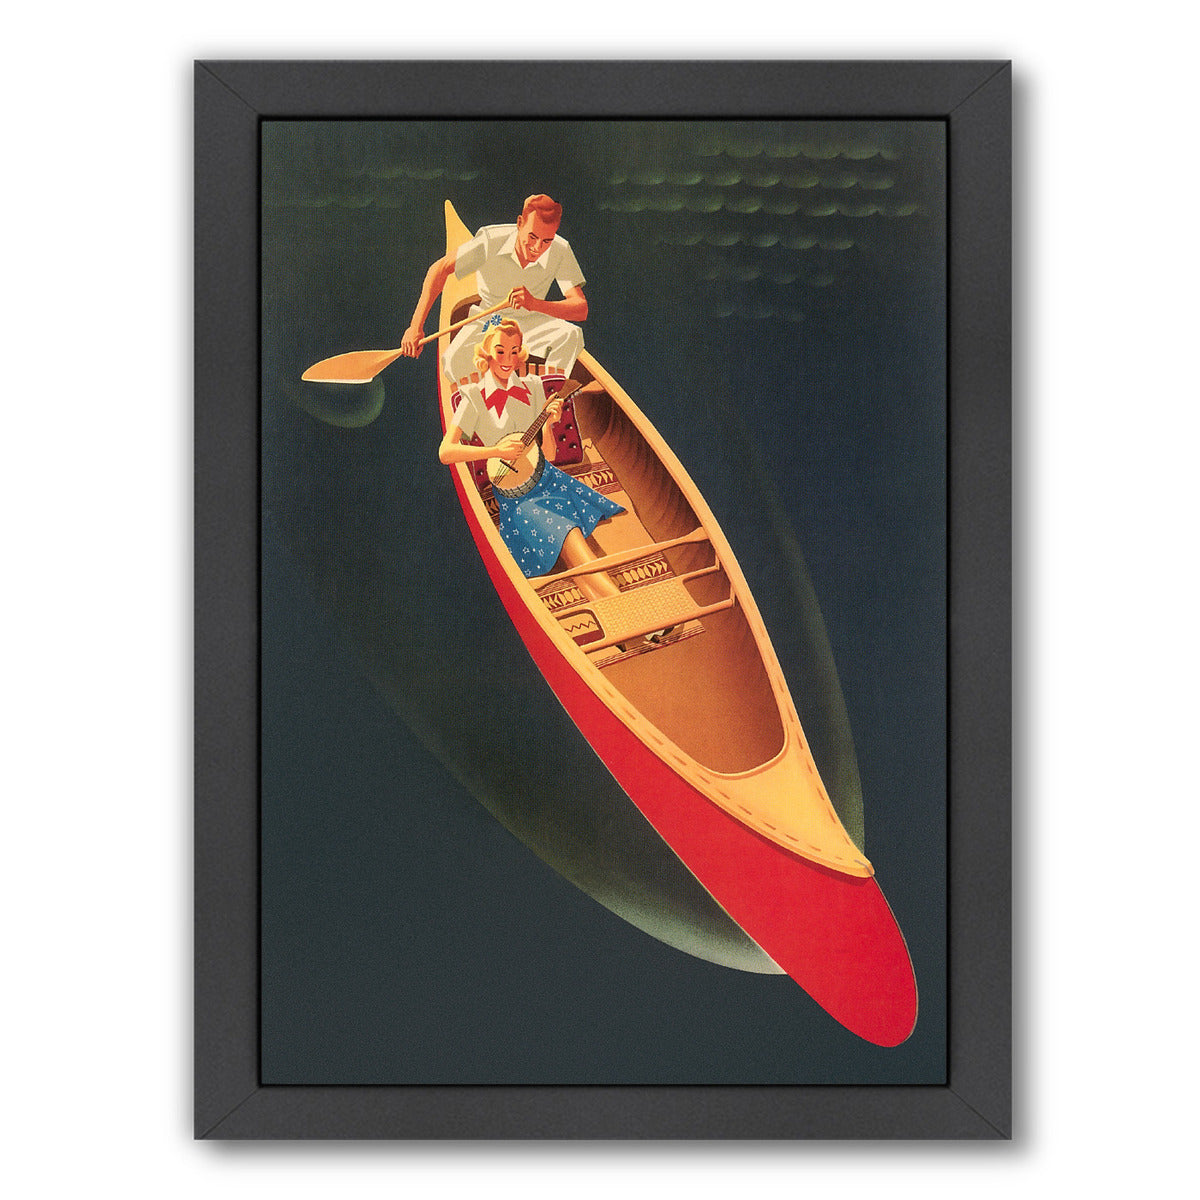 Couple In Canoe by Found Image Press Framed Print - Americanflat